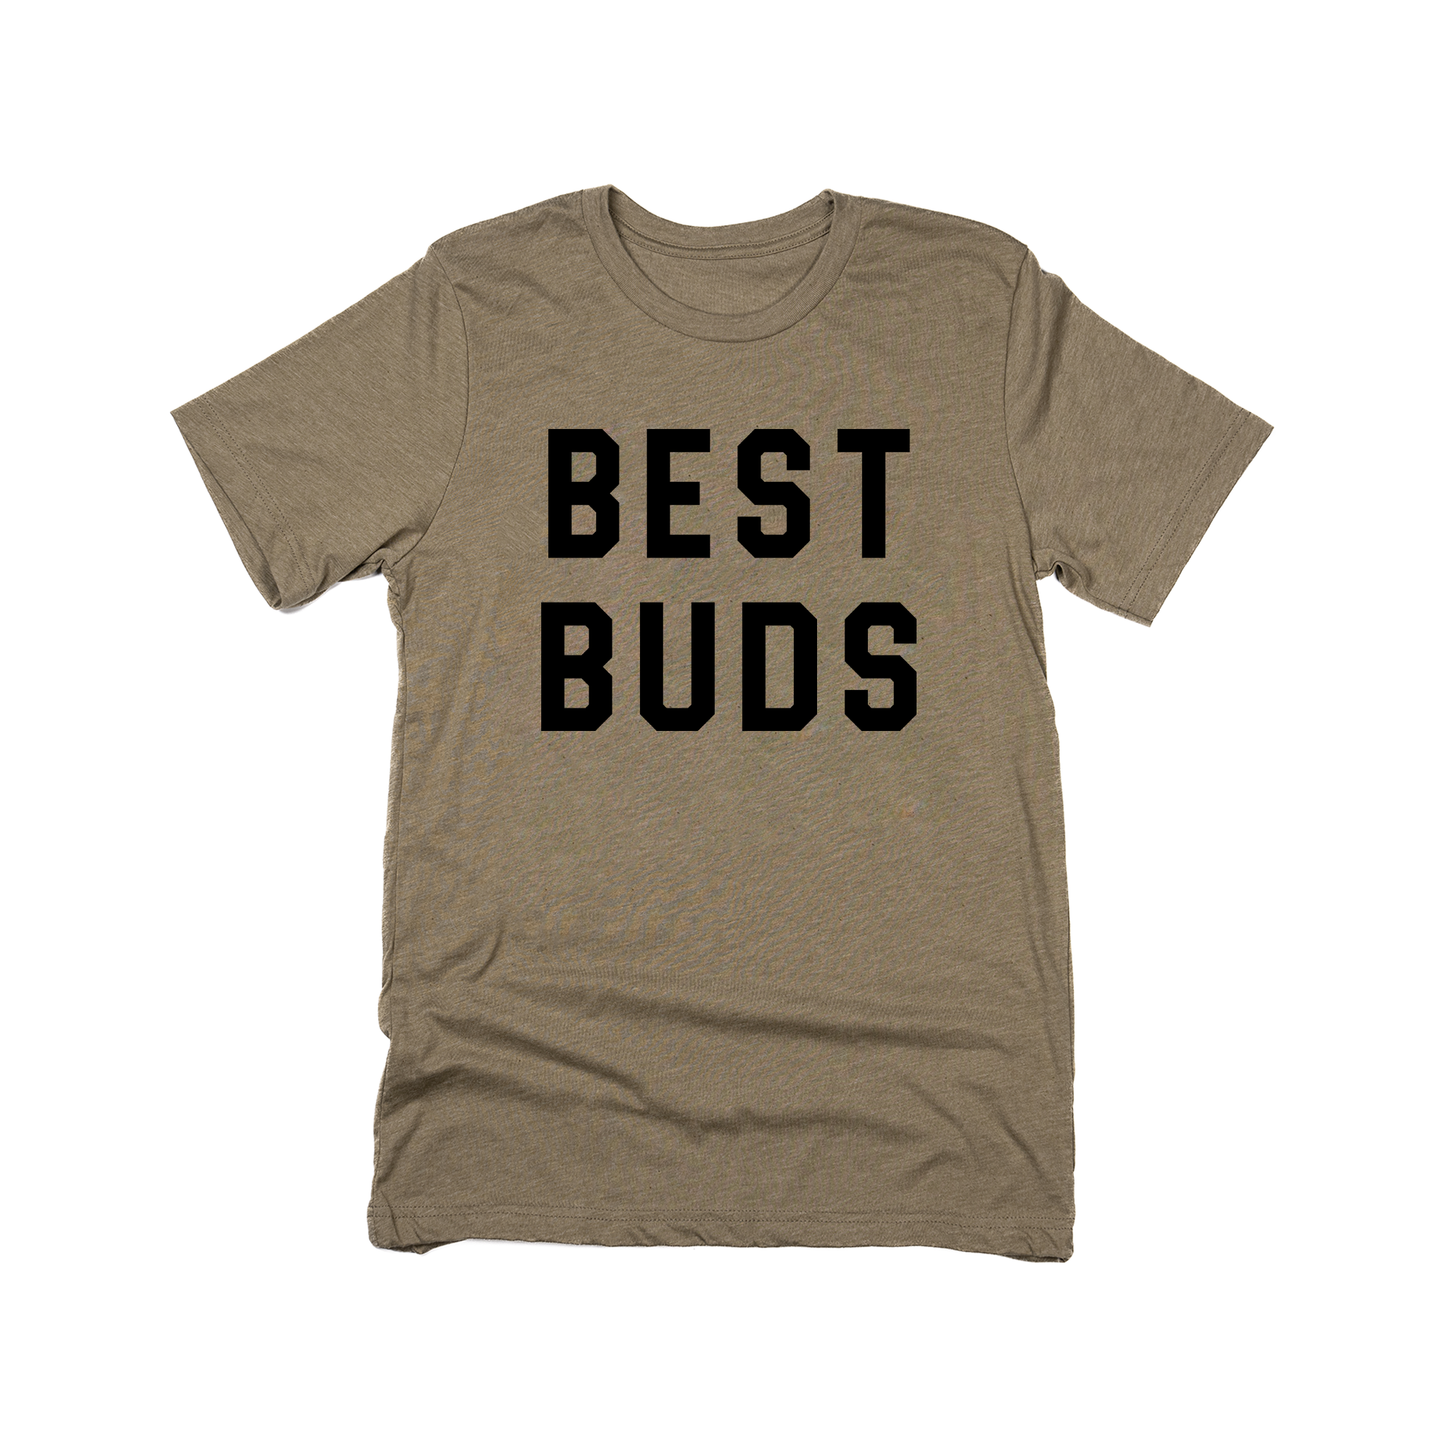 Best Buds (Across Front, Black) - Tee (Olive)